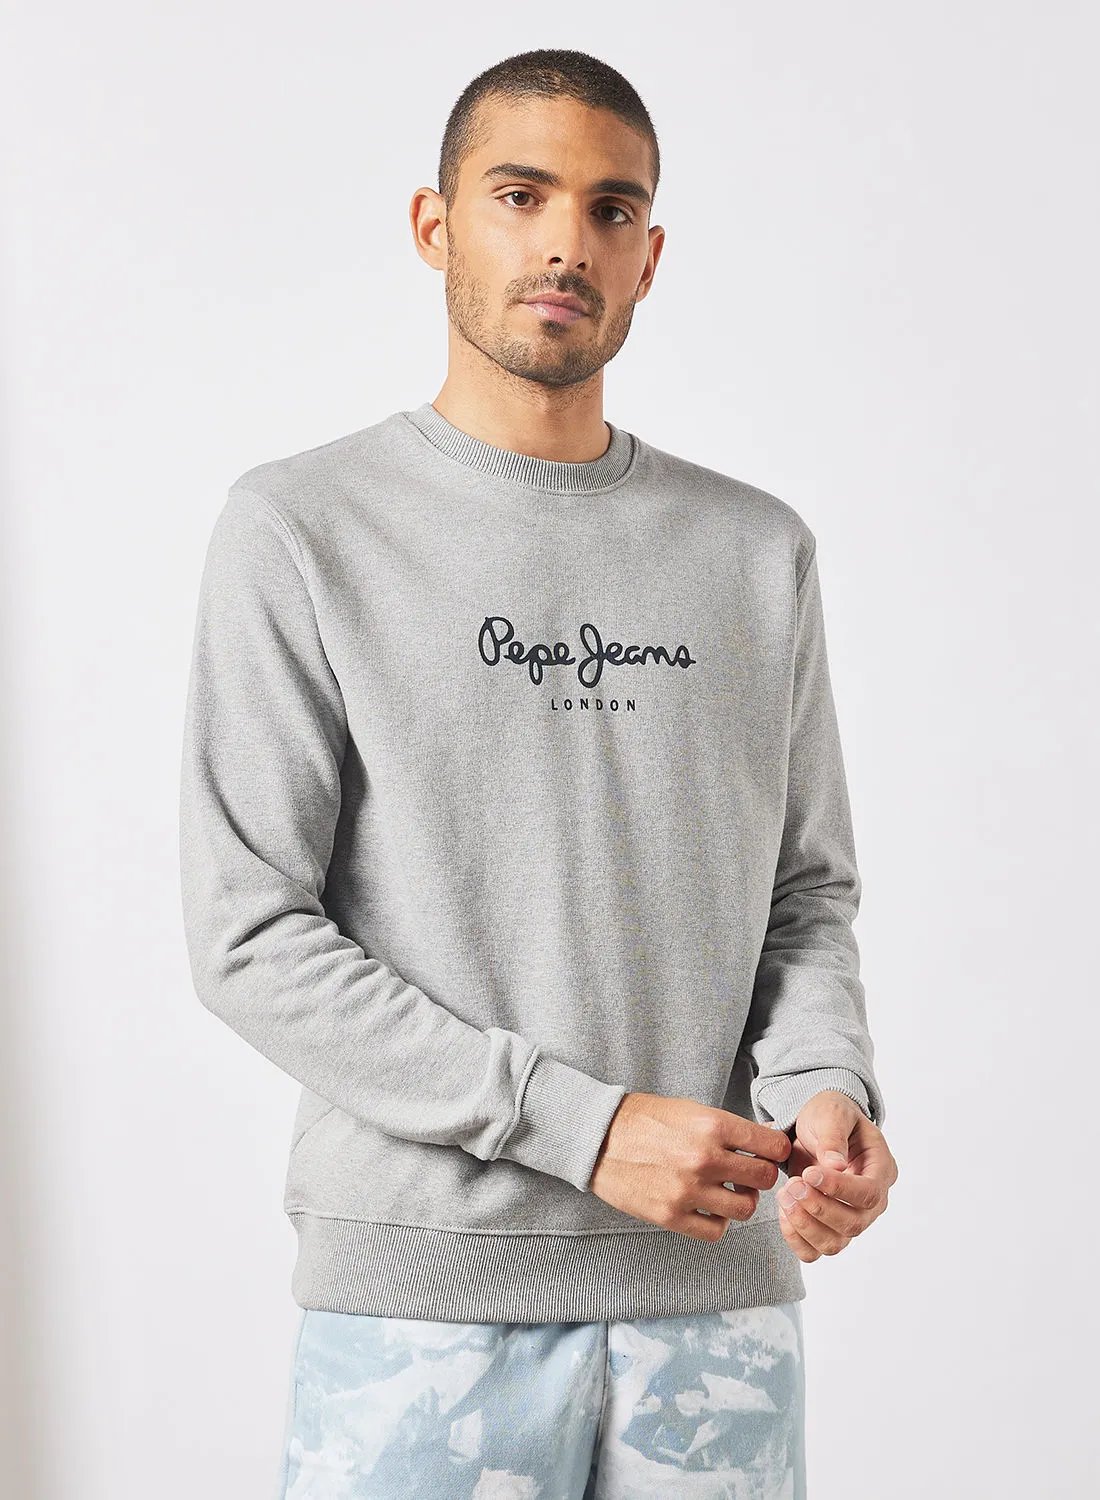 Pepe Jeans LONDON Dylan Logo سويت شيرت رمادي